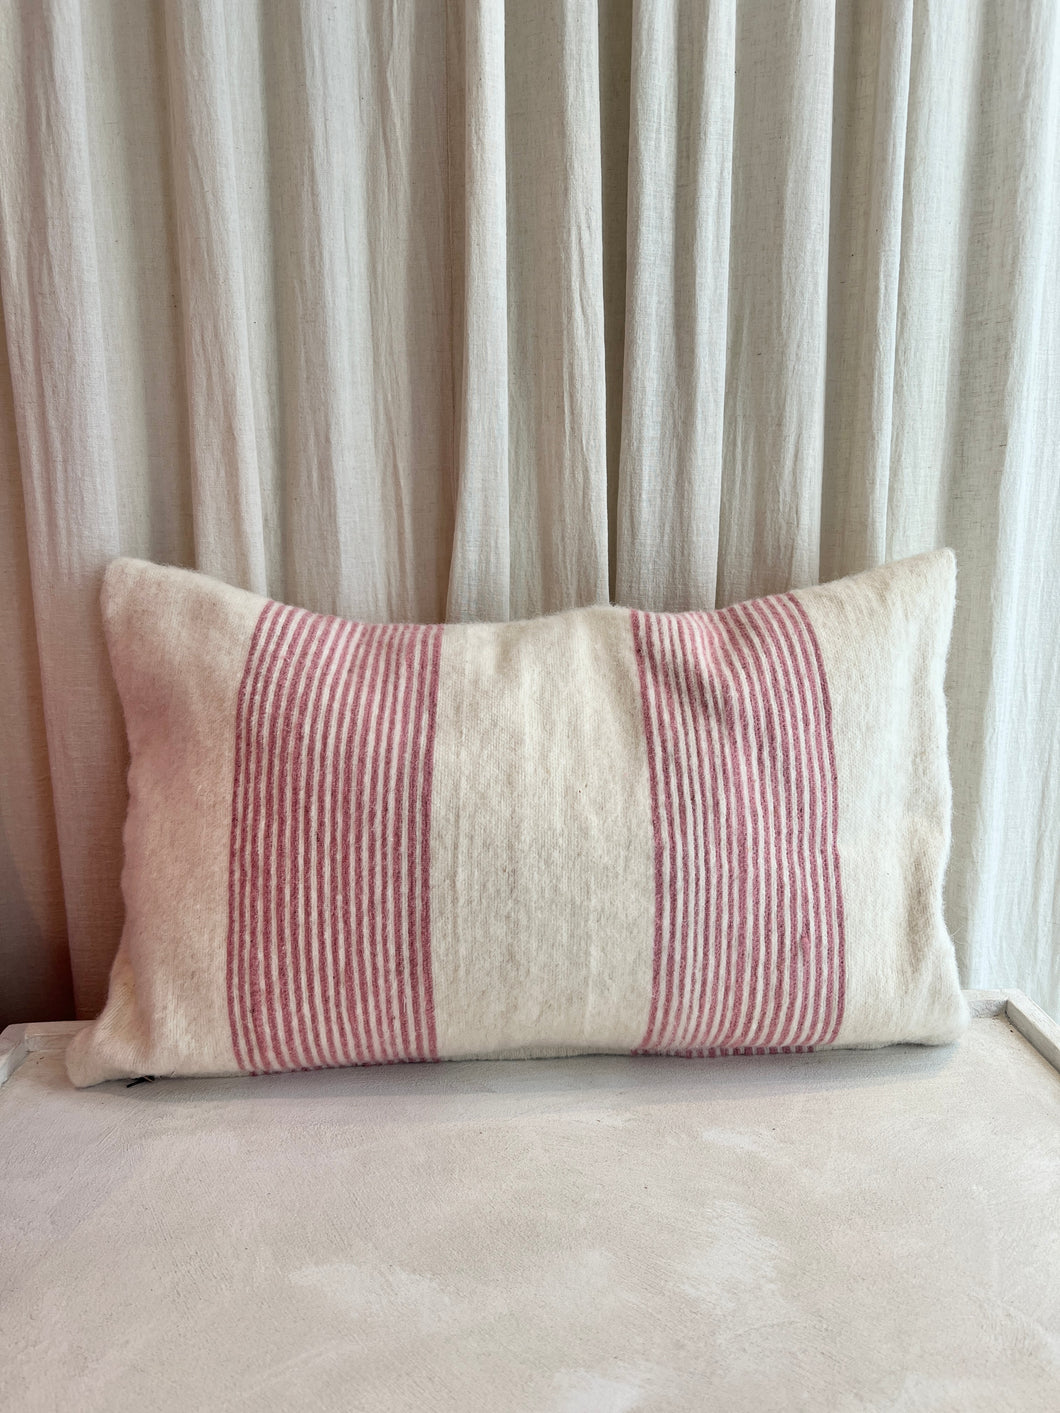 Household Hardware - Wool Pillow - Soft Pink Stripes